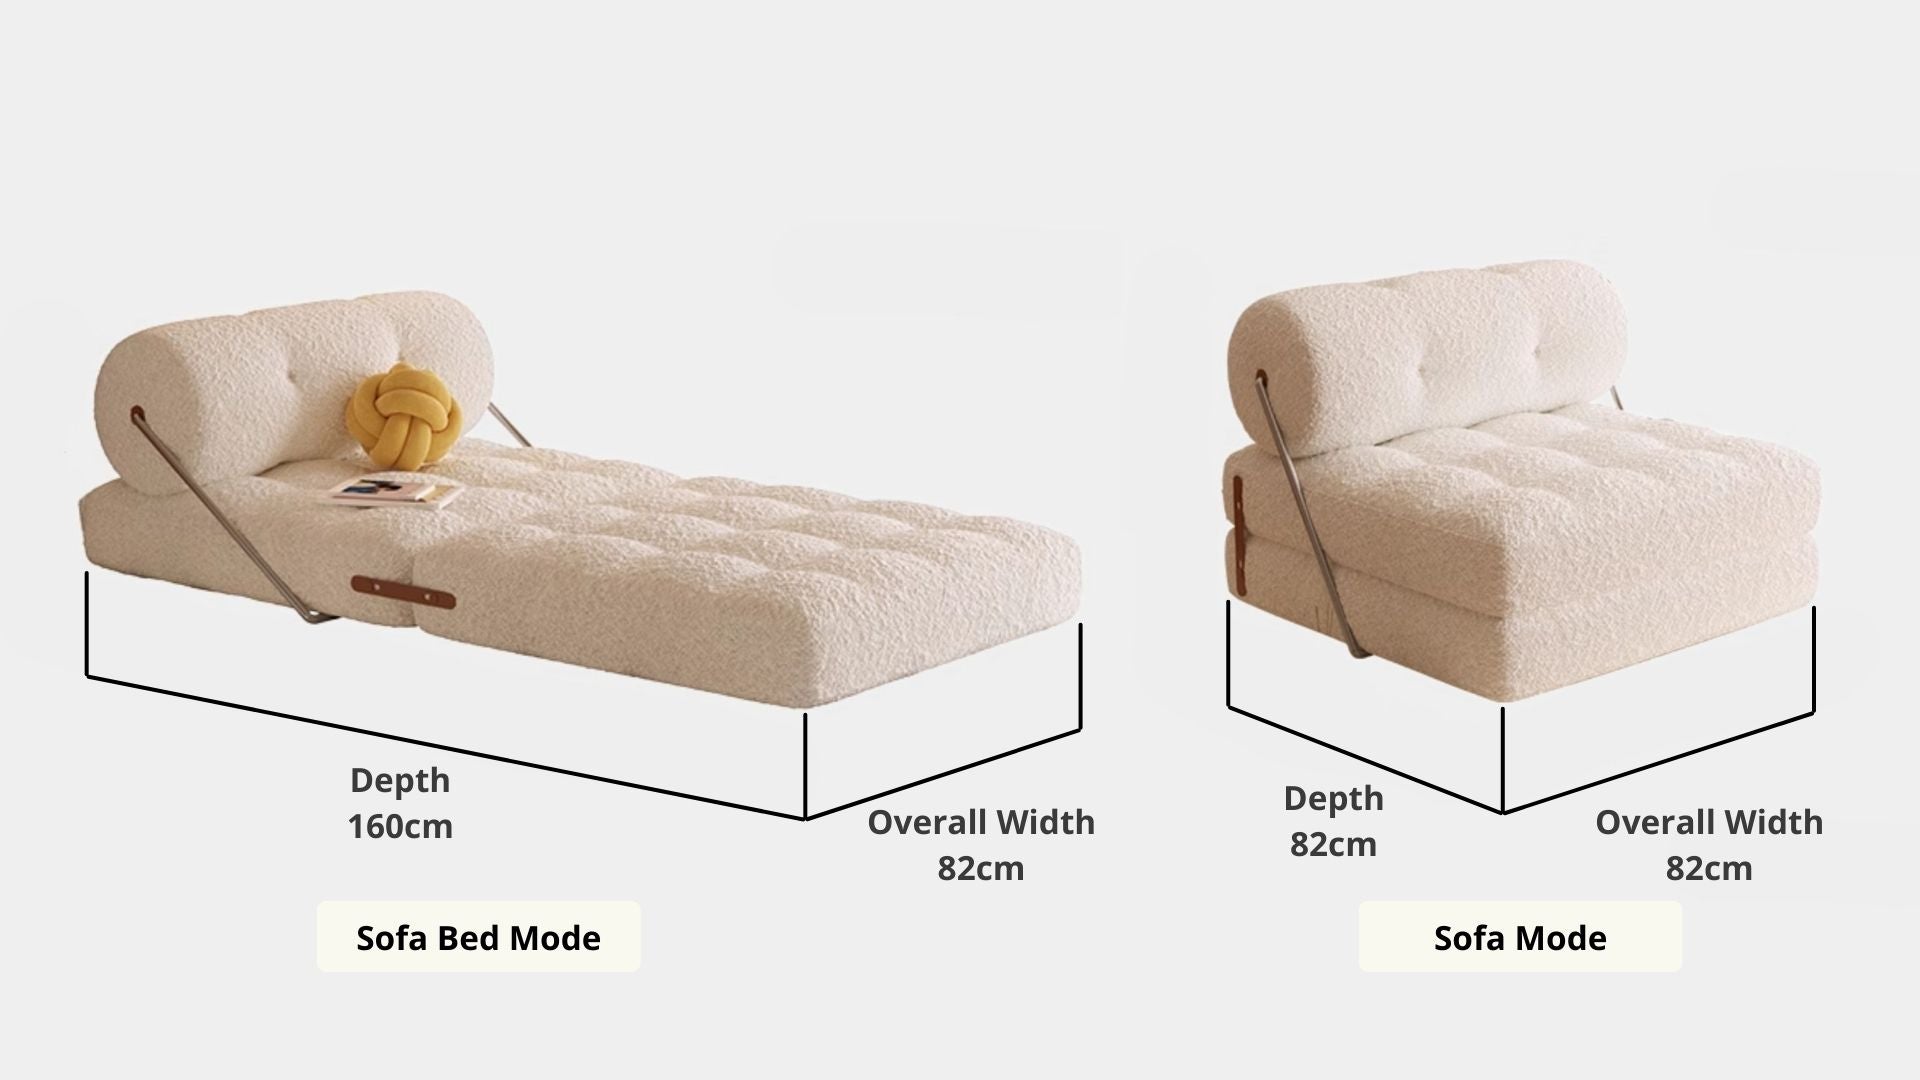 Details the key dimensions in terms of overall width, overall depth and seat width for Cob Fabric Sofa Bed